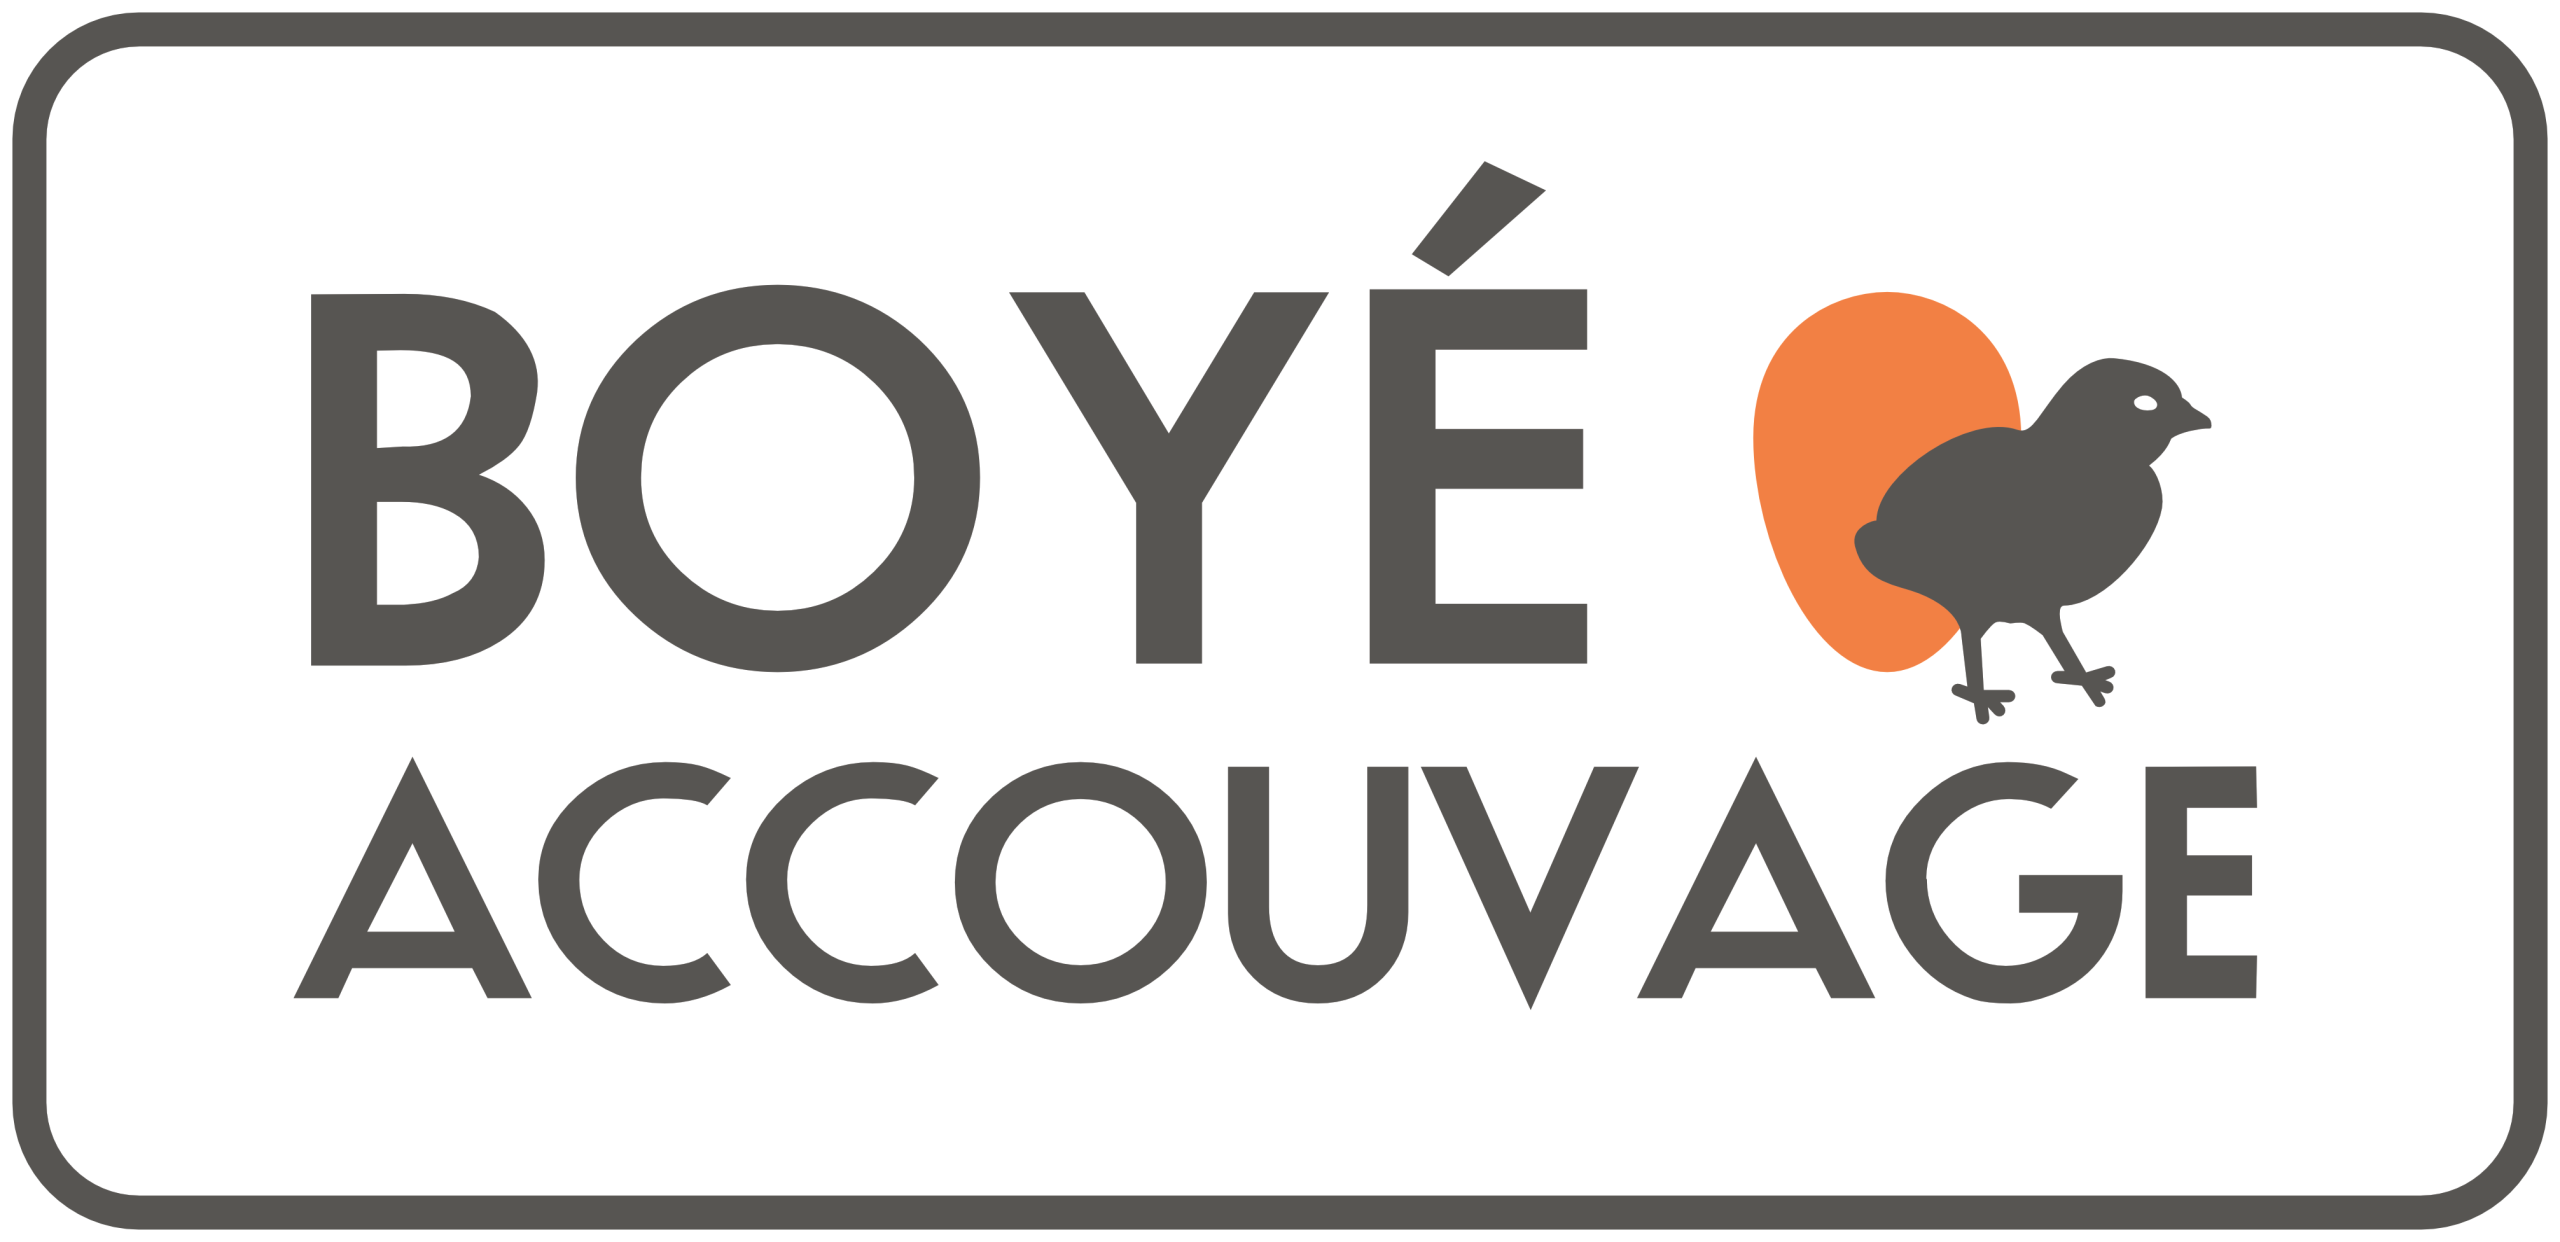 Boye-accouvage-chagriculture-partenaire-avipole-formation-ploufragan